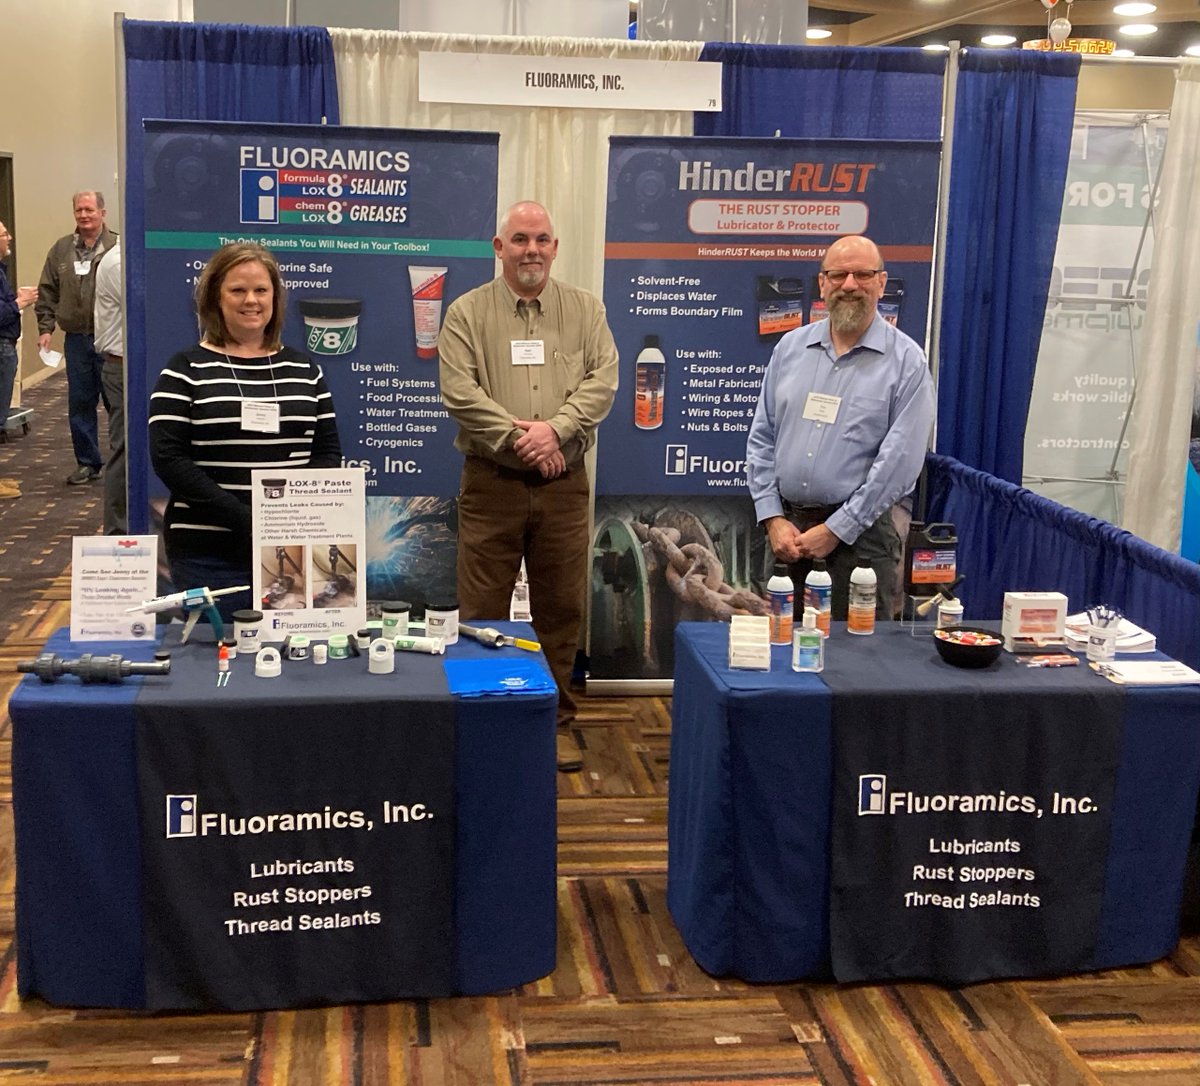 Wisconsin Rural Water Association: WRWA 34th Annual Technical Conference for Water and Wastewater Treatment. Fluoramics will be exhibiting March 16 – 17, 2022 at the La Crosse Center. Stop by and visit Jenny and Karl in booth #46! https://t.co/3MUGEwYEoE #WRWA https://t.co/k3oaYm0XMM